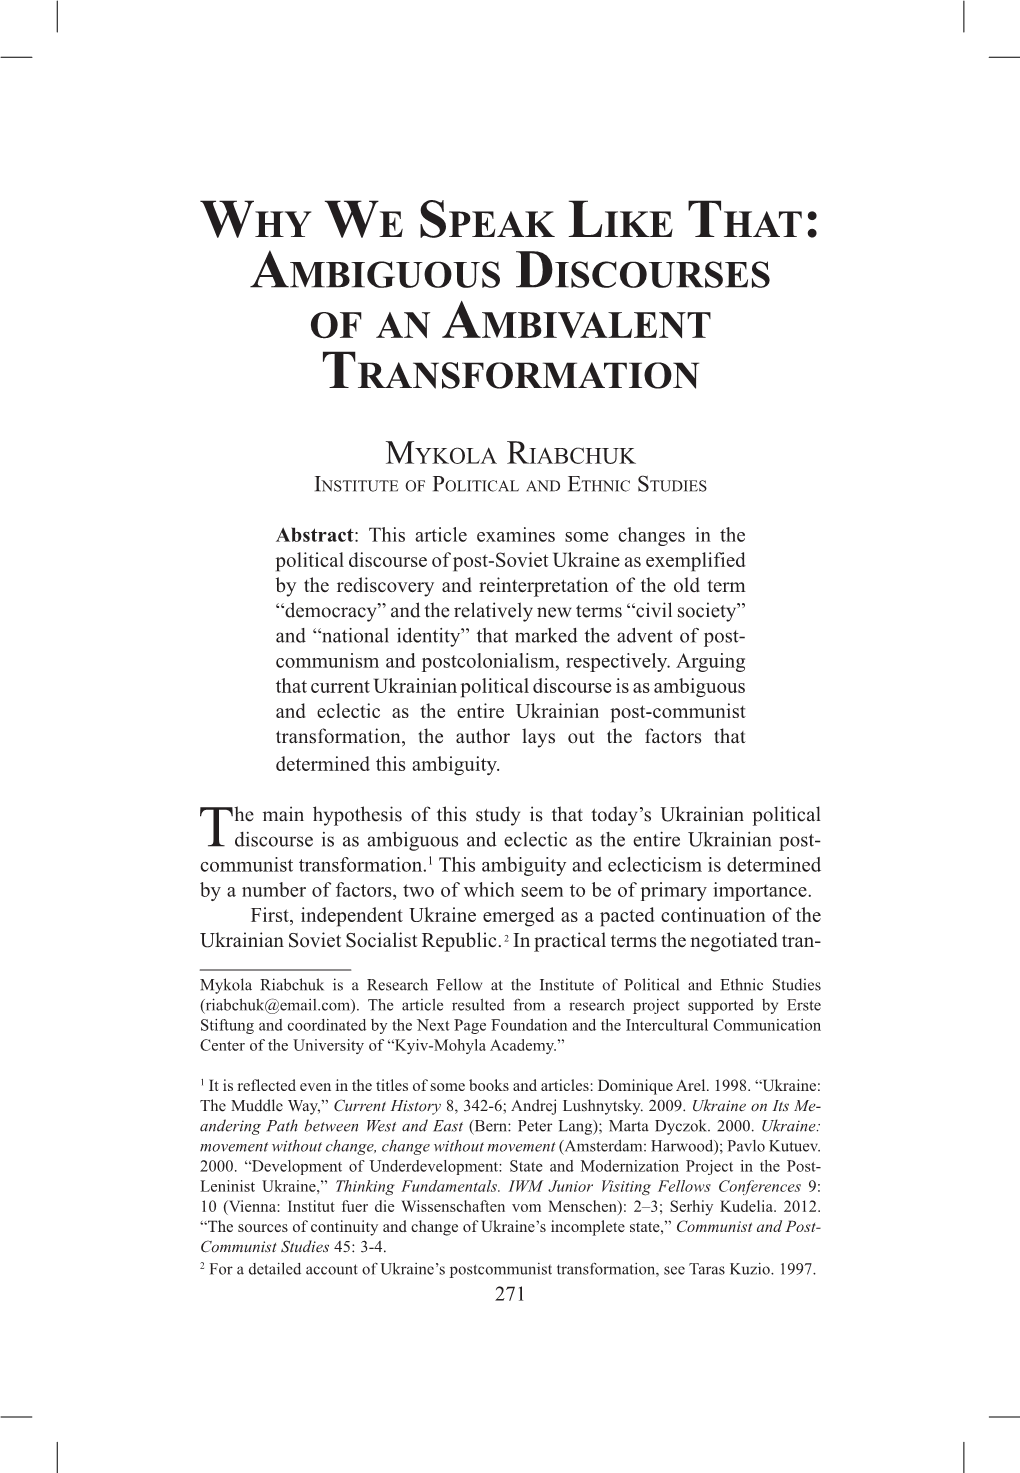 Ambiguous Discourses of an Ambivalent Transformation